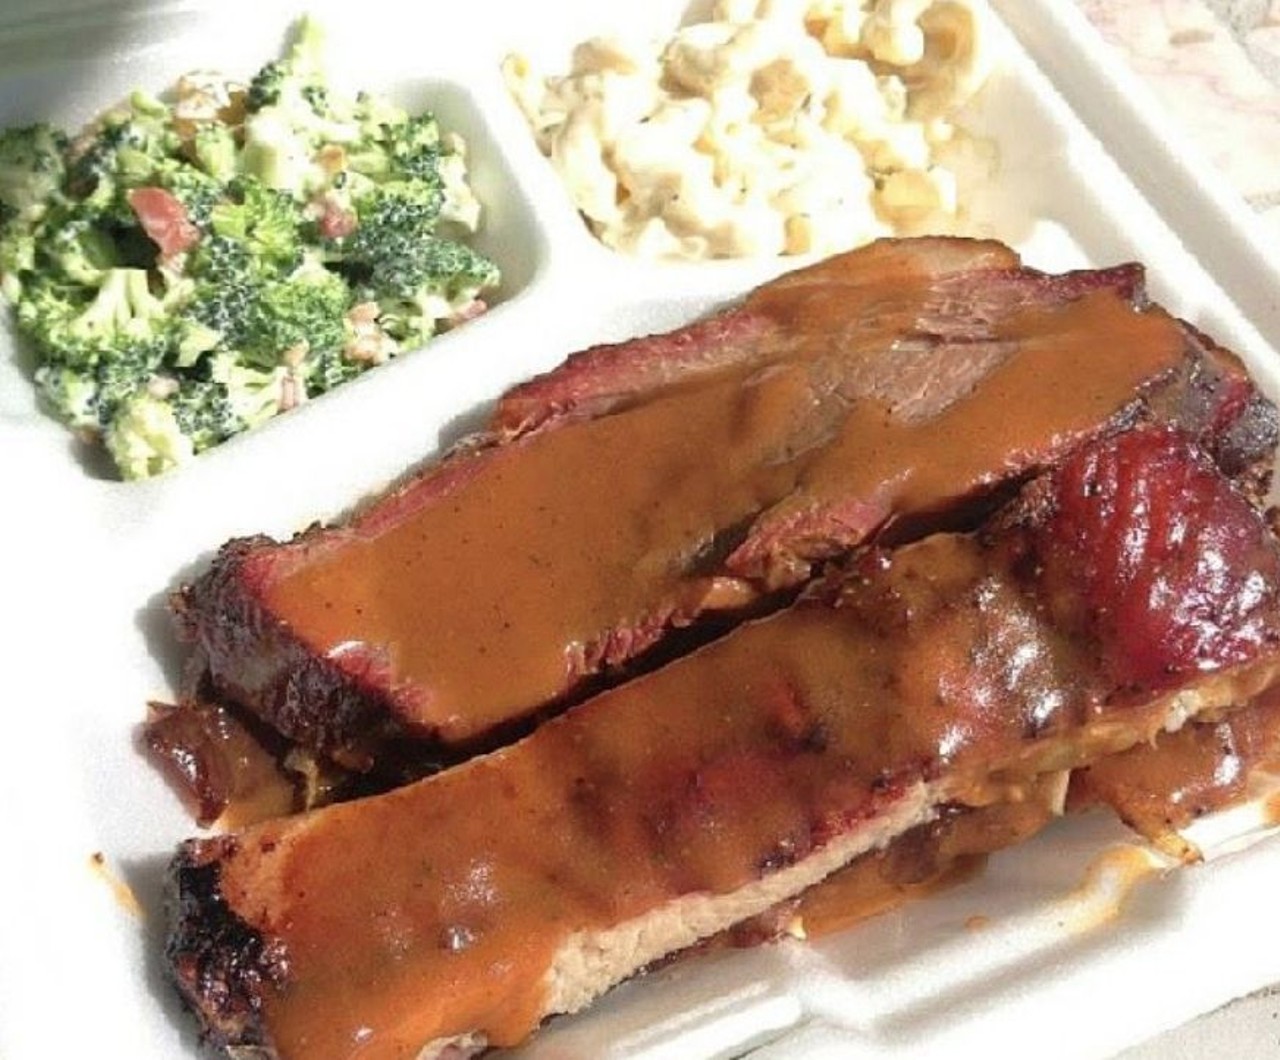 Try this: Classic BBQ ribs with old-school hearty sides give this place a timeless taste.
Photo via sosaic/ Instagram